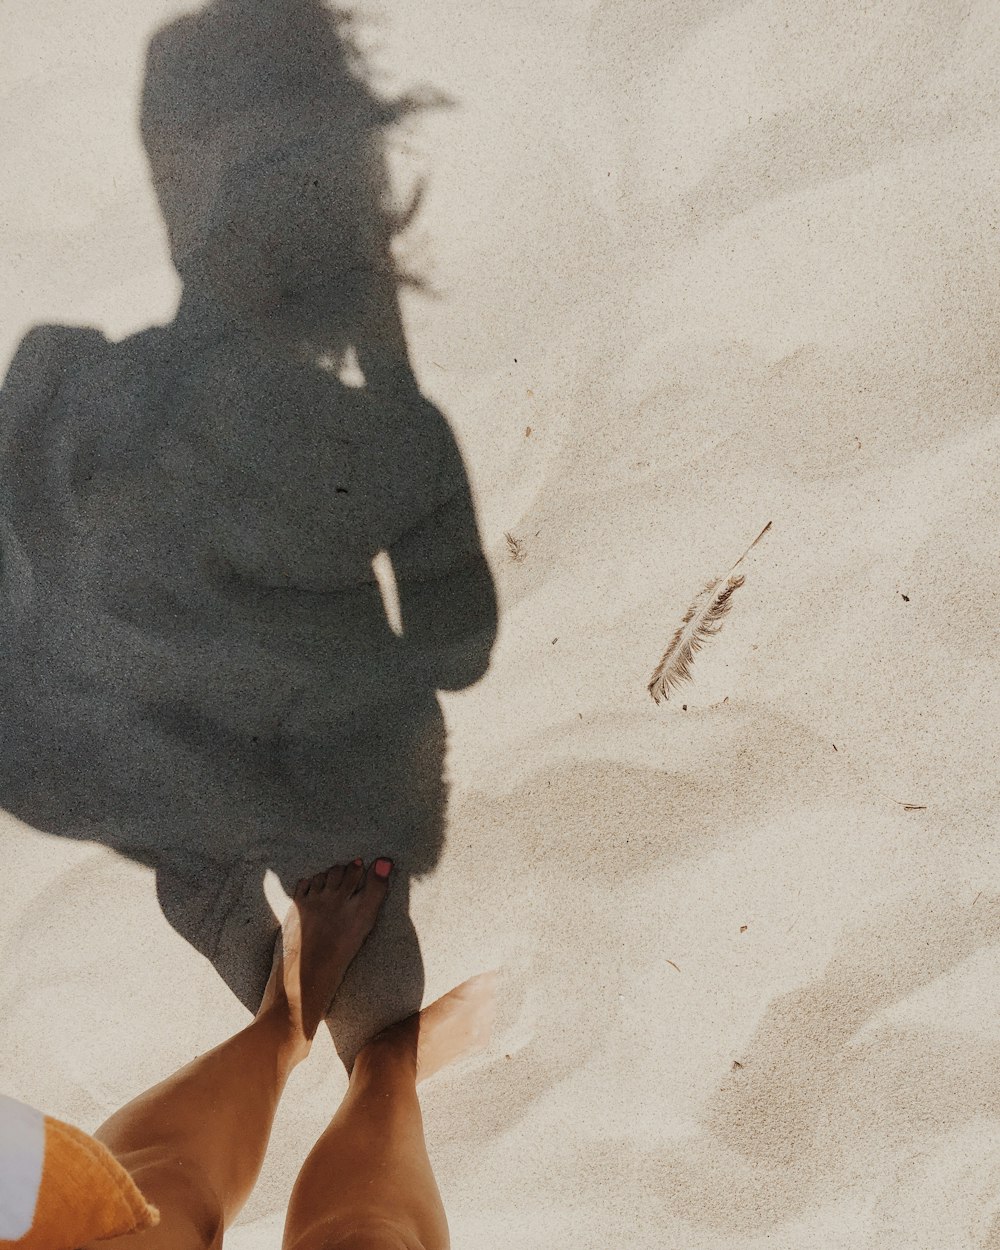 The shadow of a woman standing in the sand on a beach.